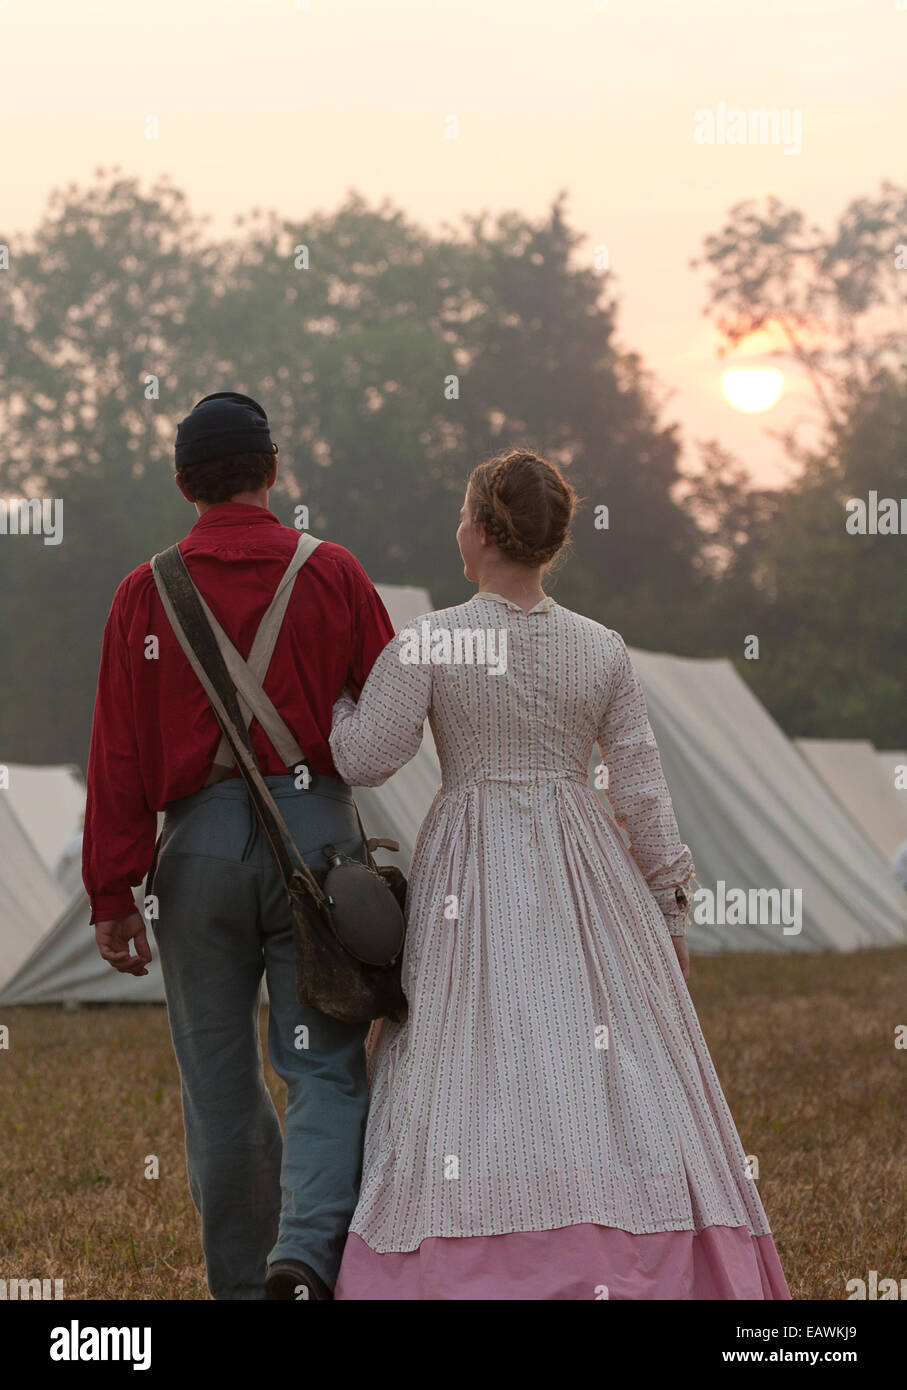 A young couple dressed in Civil War era clothing walk arm in arm. Stock Photo